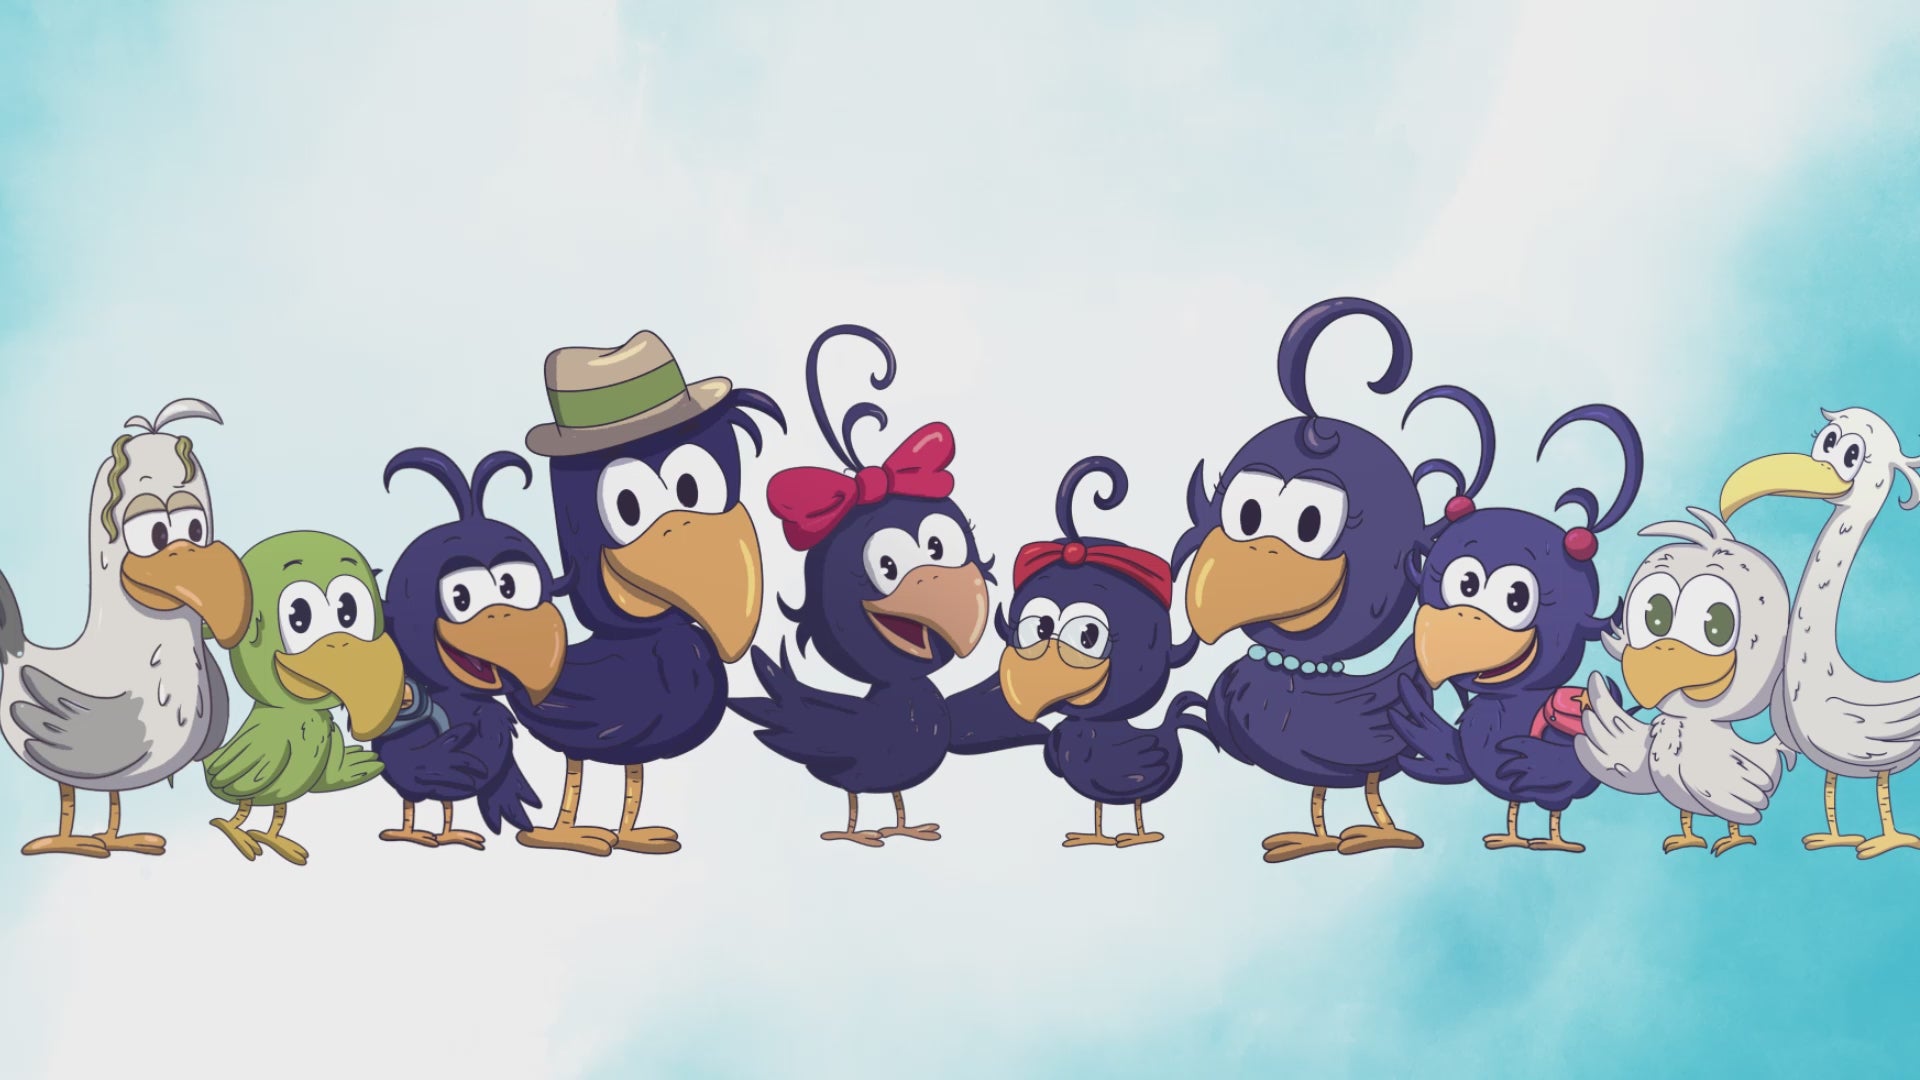 Load video: Join the whimsical world of Curly Crow in this delightful kids&#39; book video introducing the enchanting characters from the seven-book series. Meet Curly Crow, the curious and adventurous curly hair crow from New Mexico, along with a colorful cast of friends and foes.